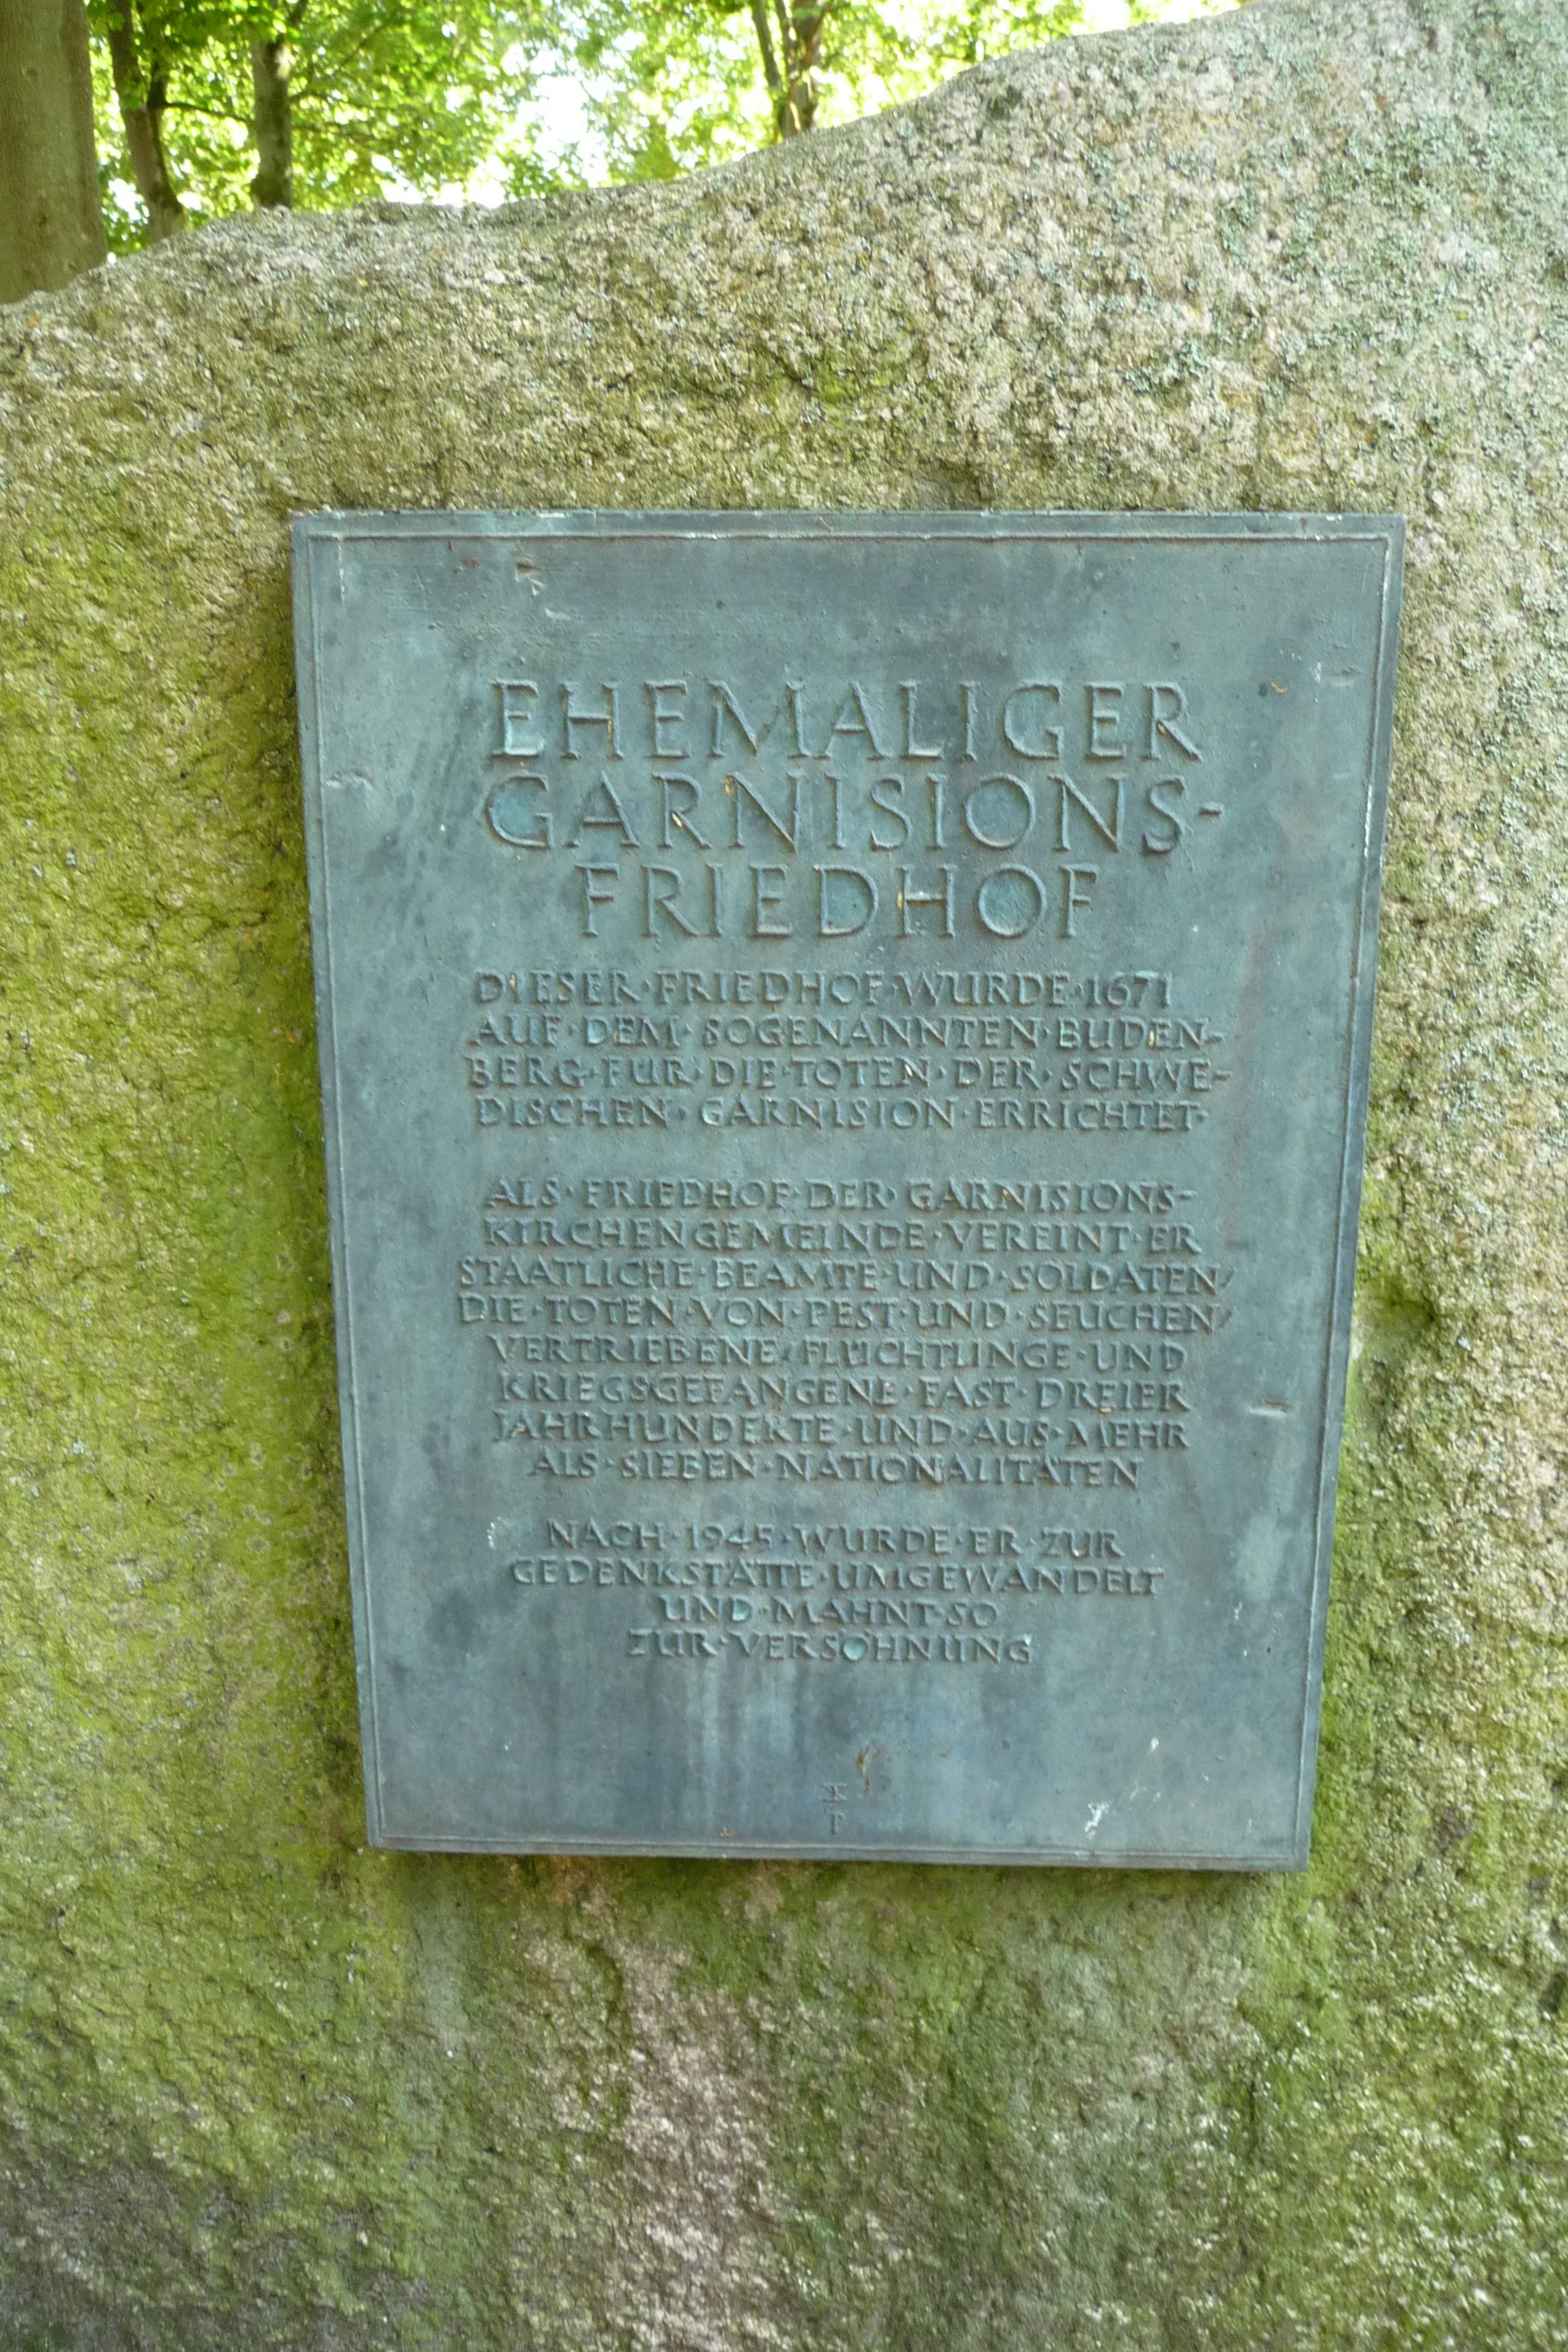 Information plaque at the cemetery